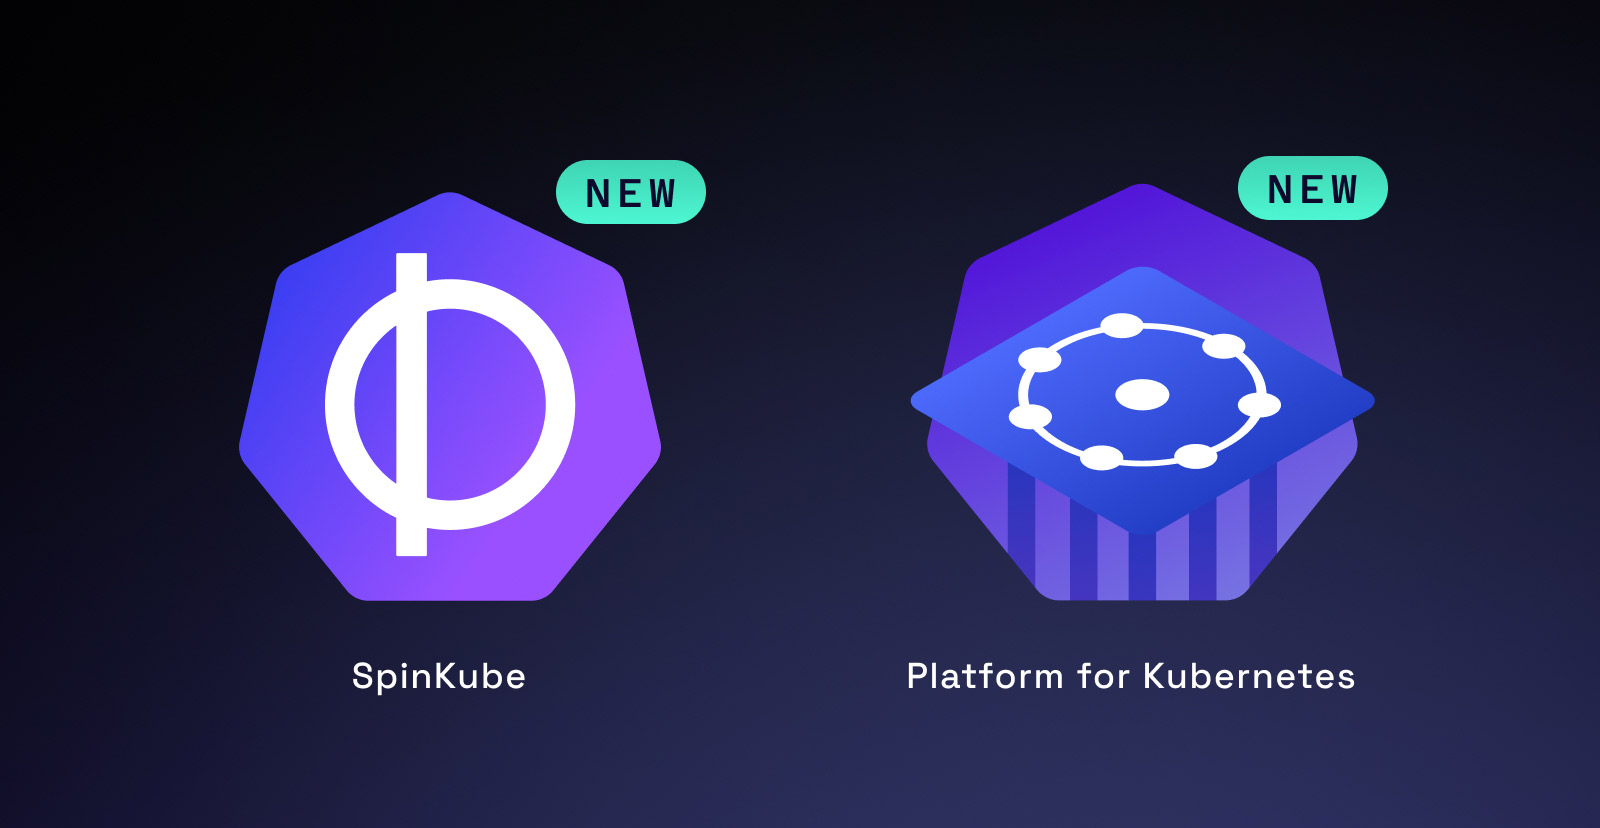 Introducing SpinKube and Fermyon Platform for Kubernetes